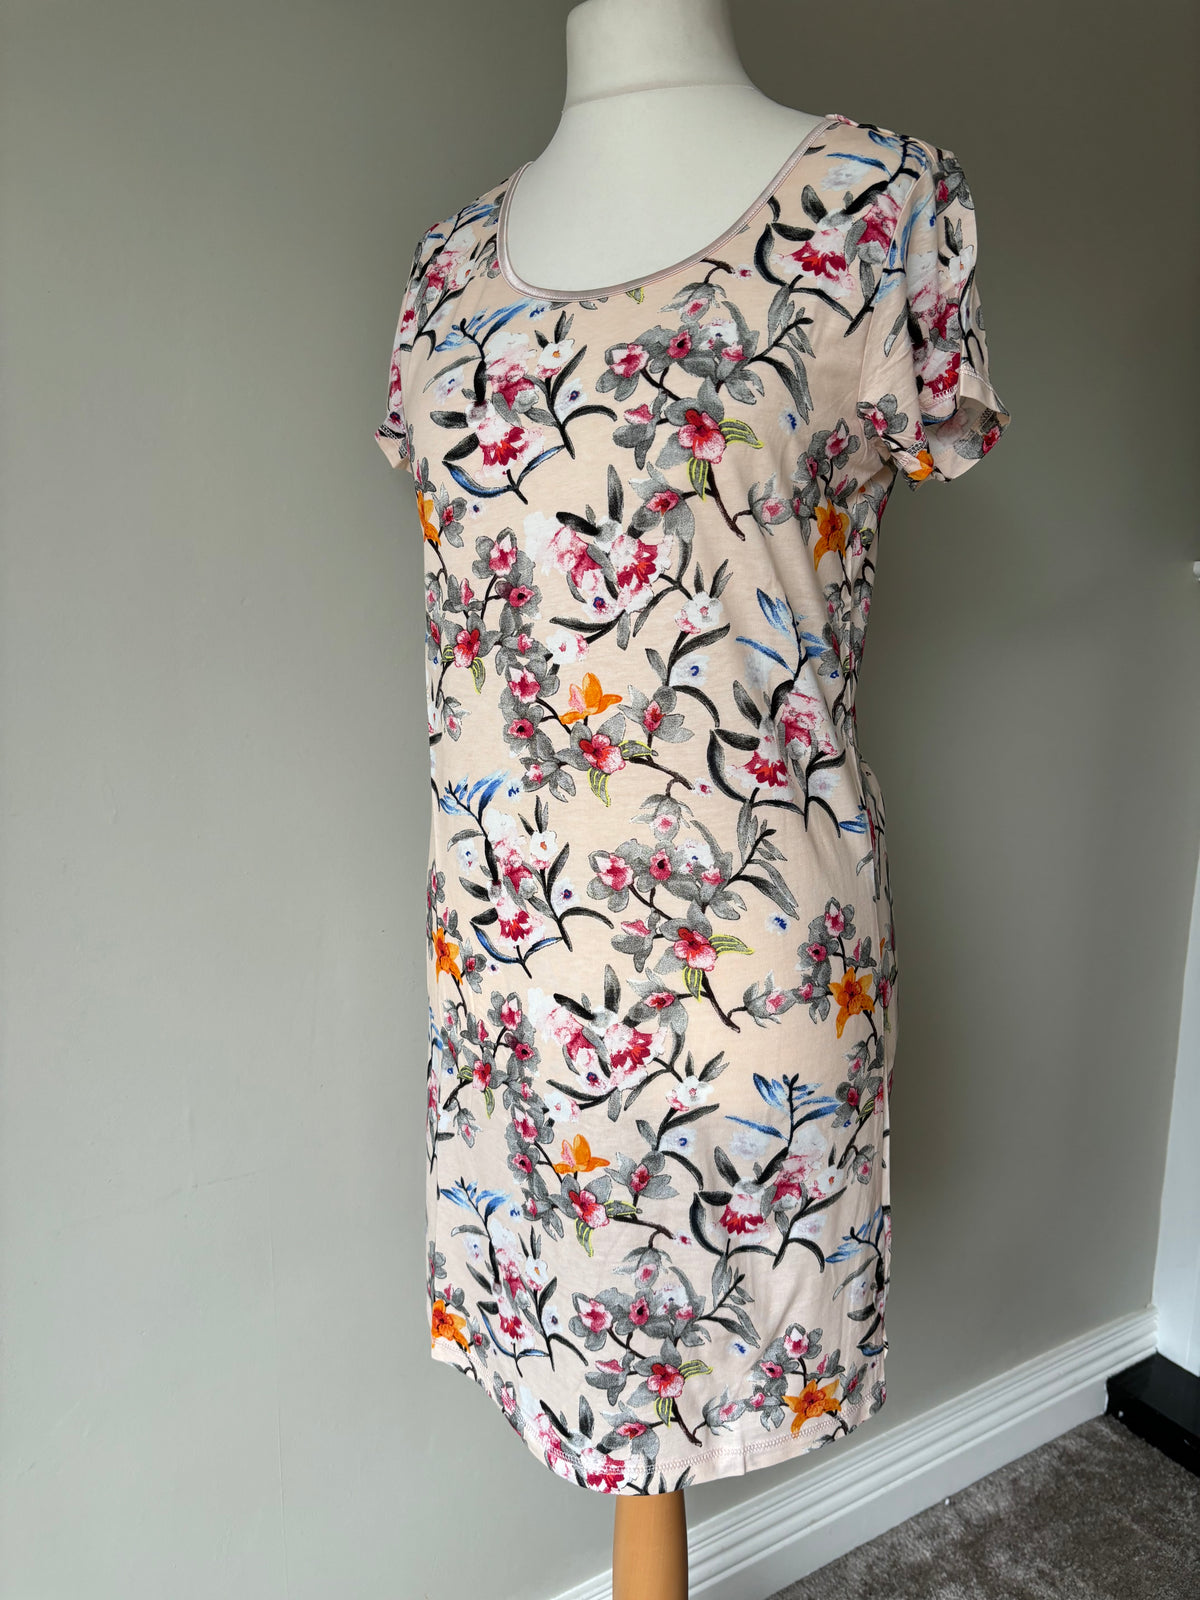 Peach floral night dress by S.Oliver Size 10/12